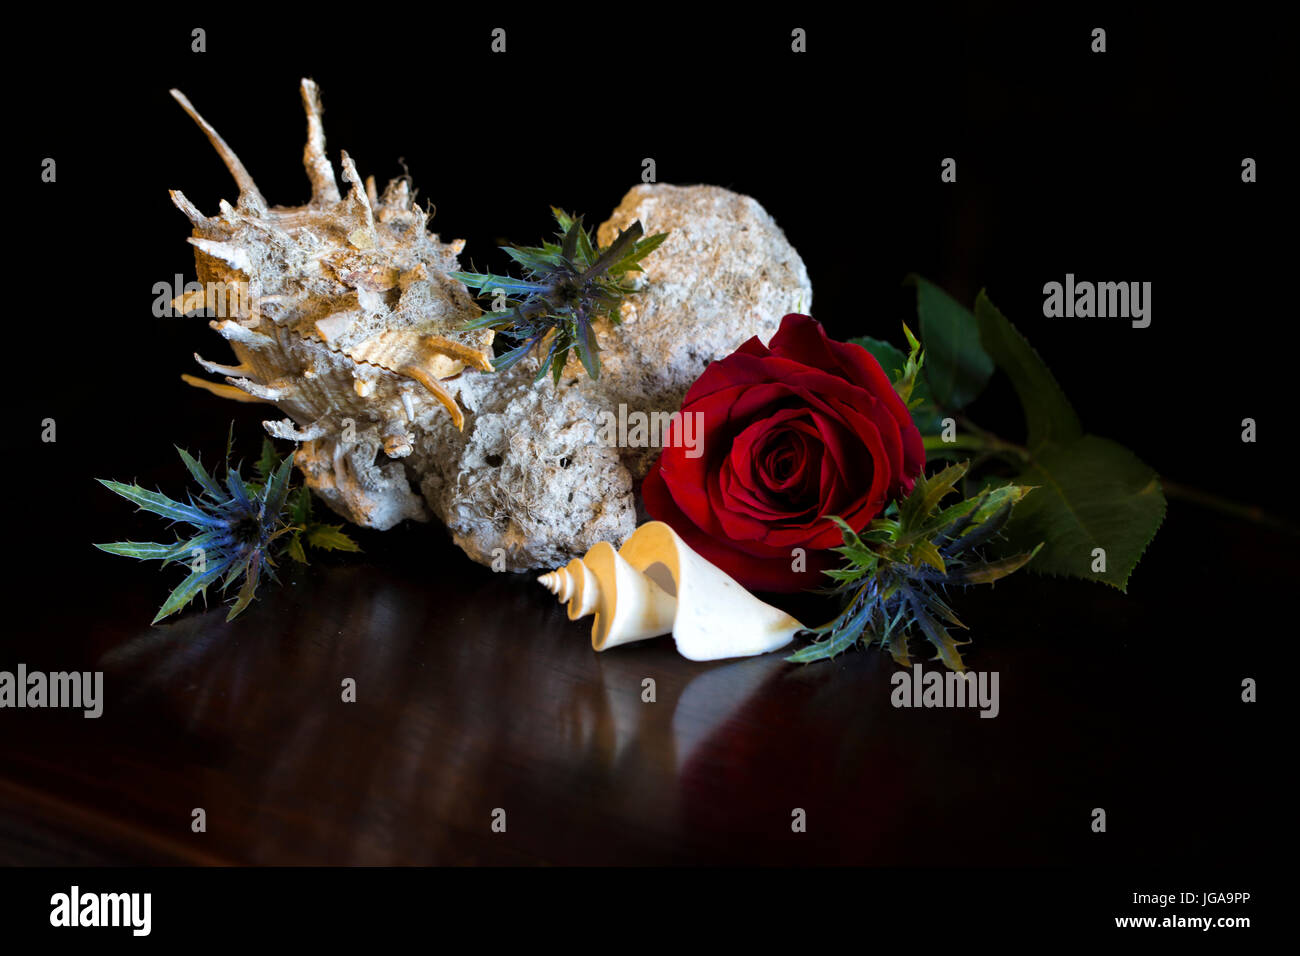 Spiny Spondylus  cemented to its rock substrate in a still life with a red rose and a Thatcheria shell contrasting rich color with seashell forms Stock Photo